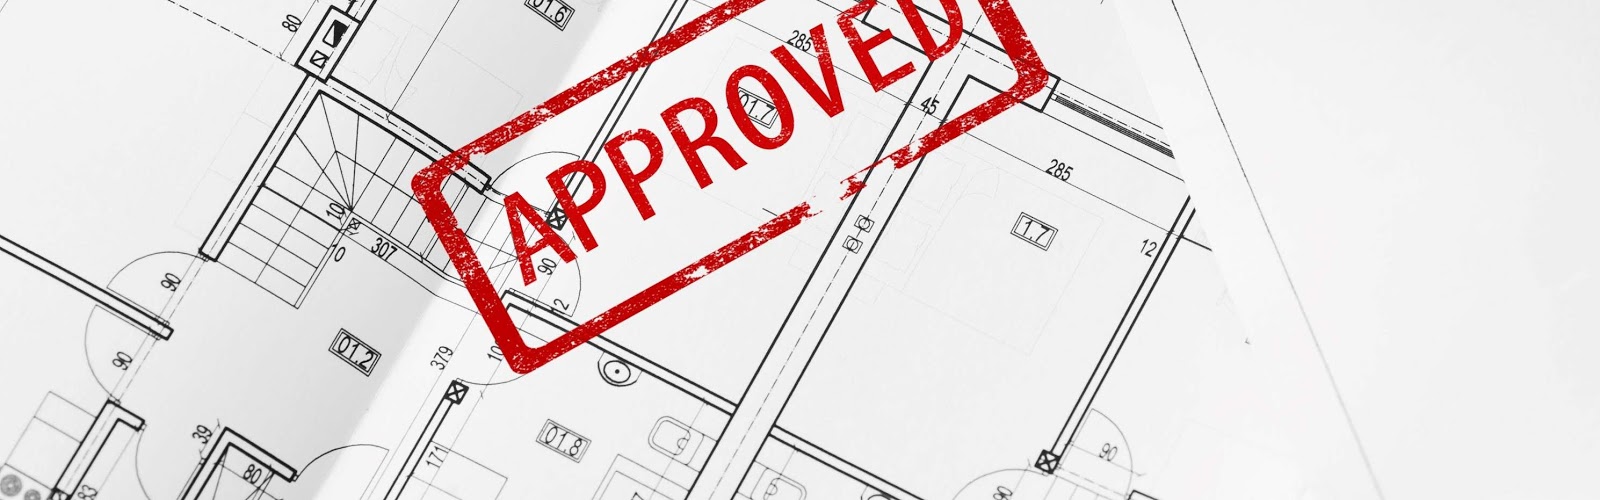 approved stamp on blueprint architectural designs